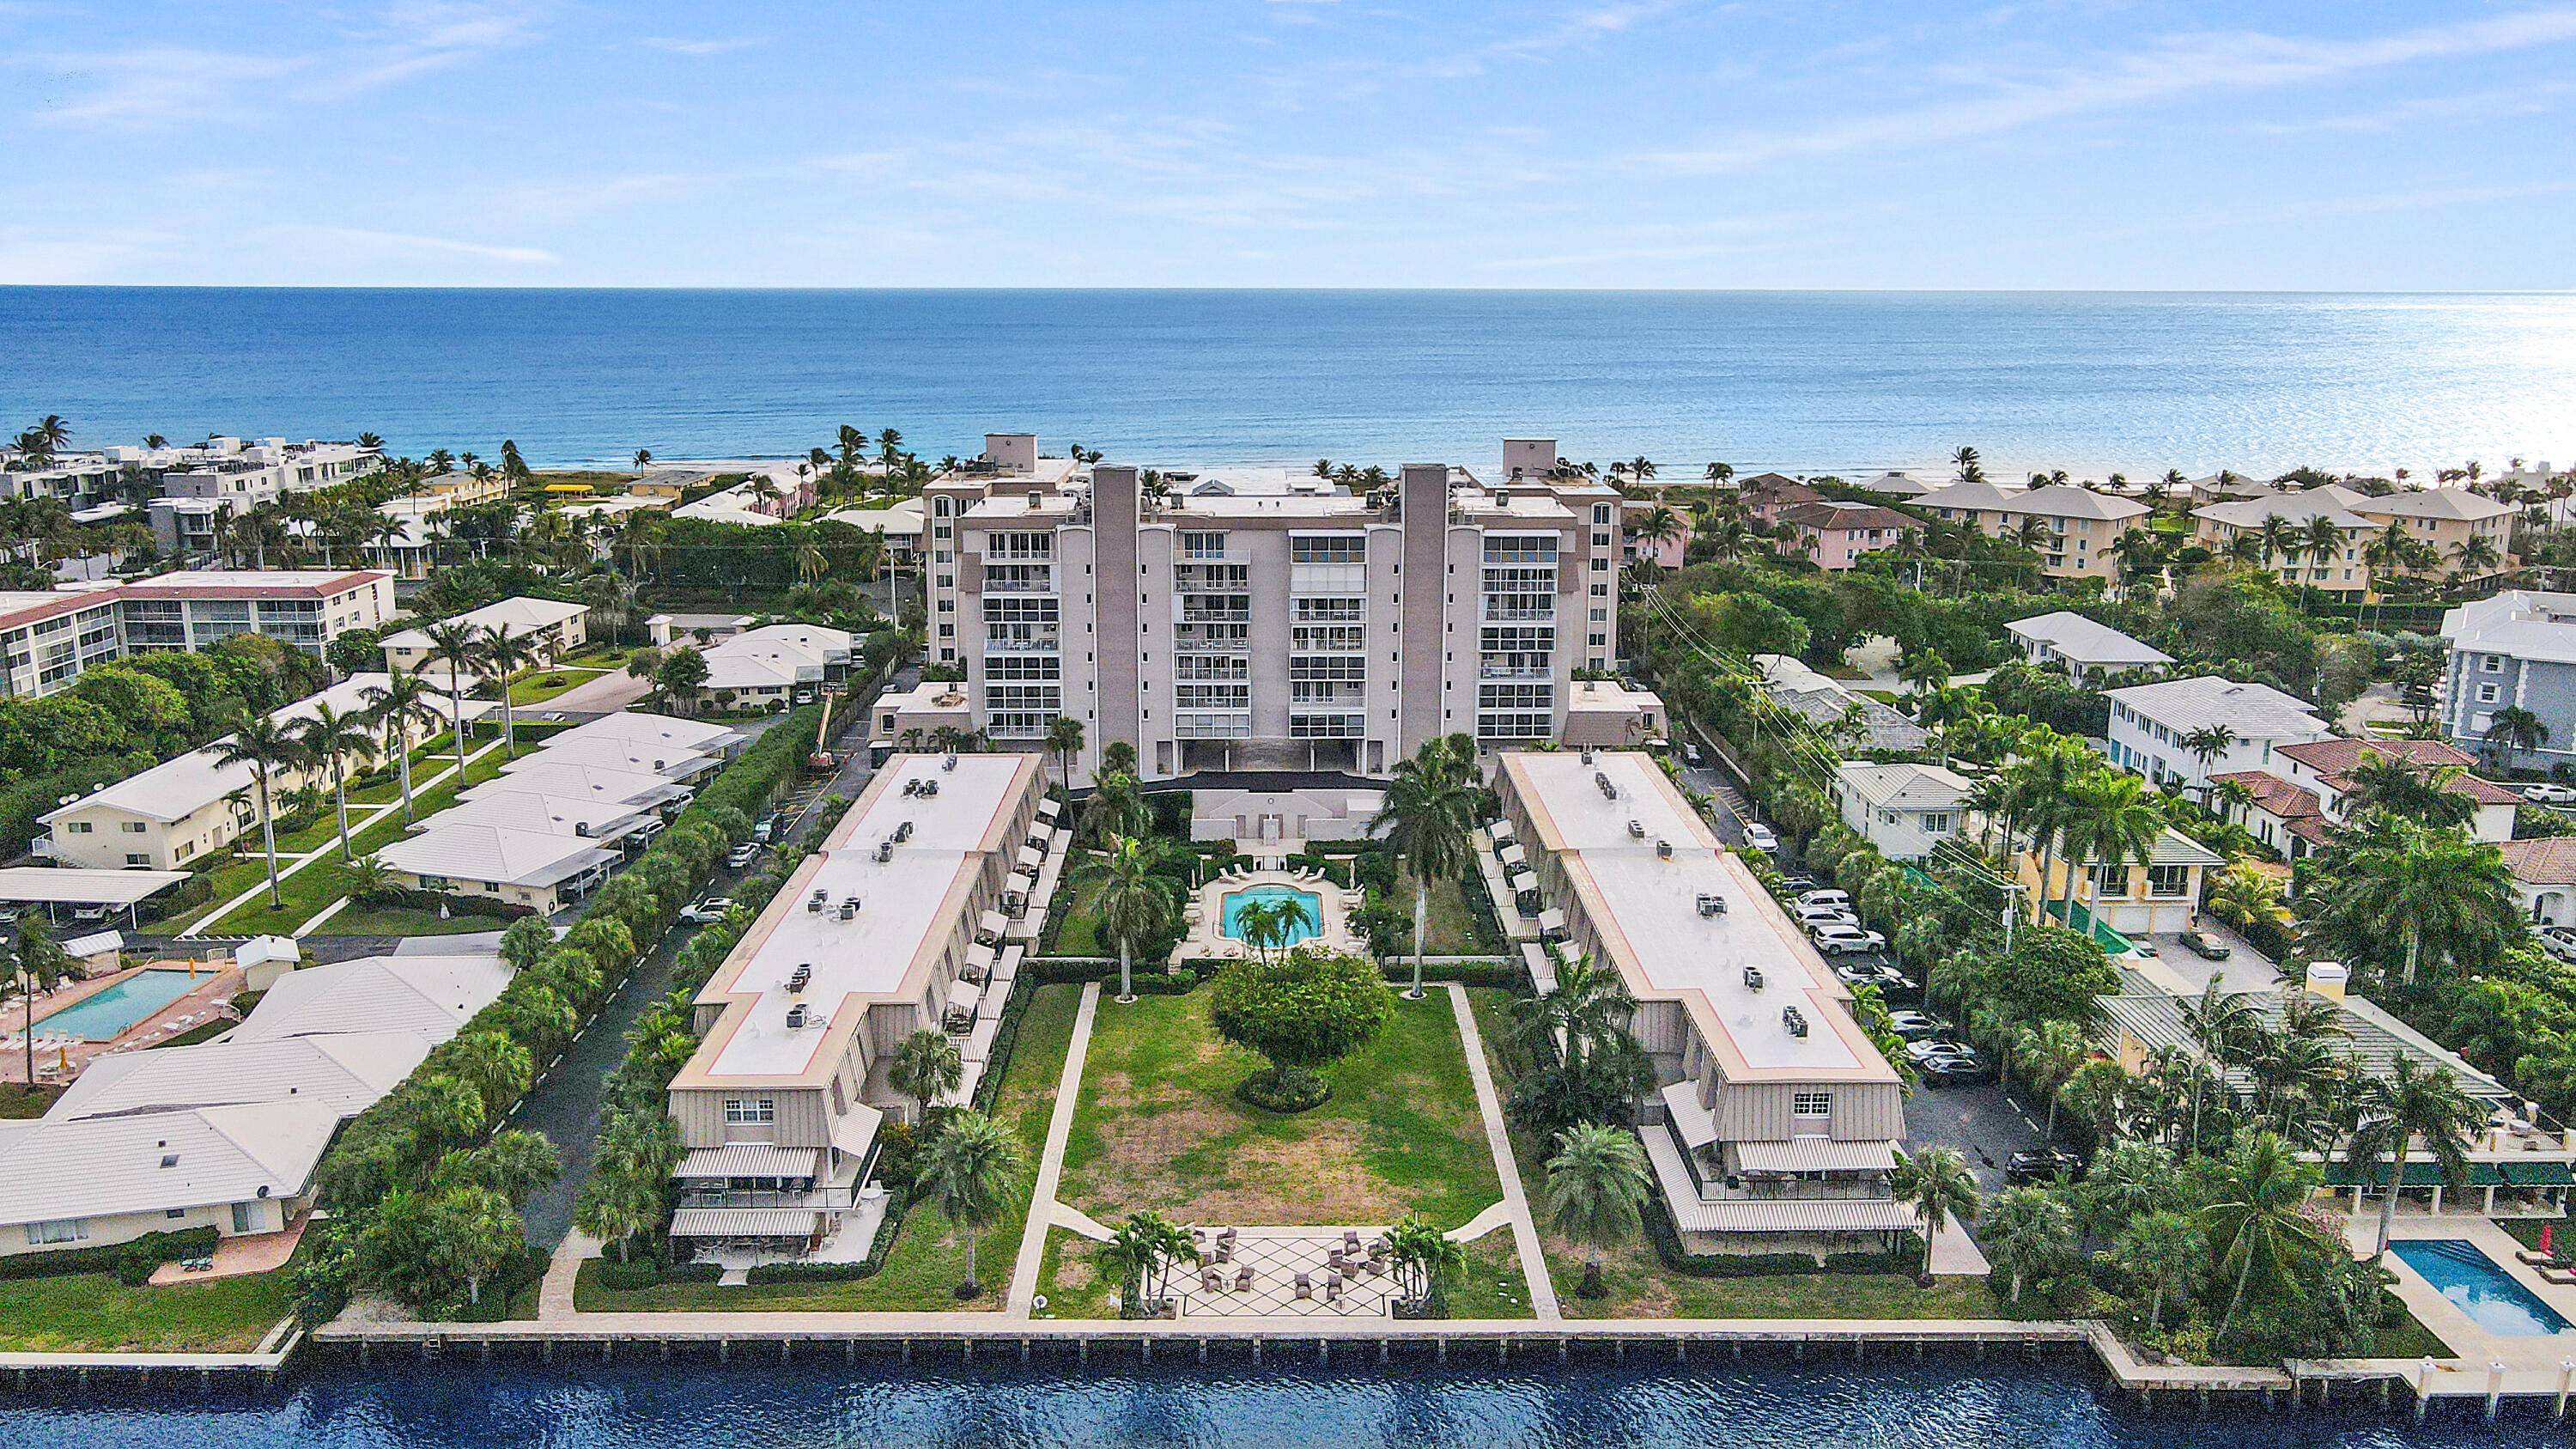 This exquisite oceanfront luxury condo in Delray Beach is a haven of sophistication opulence.